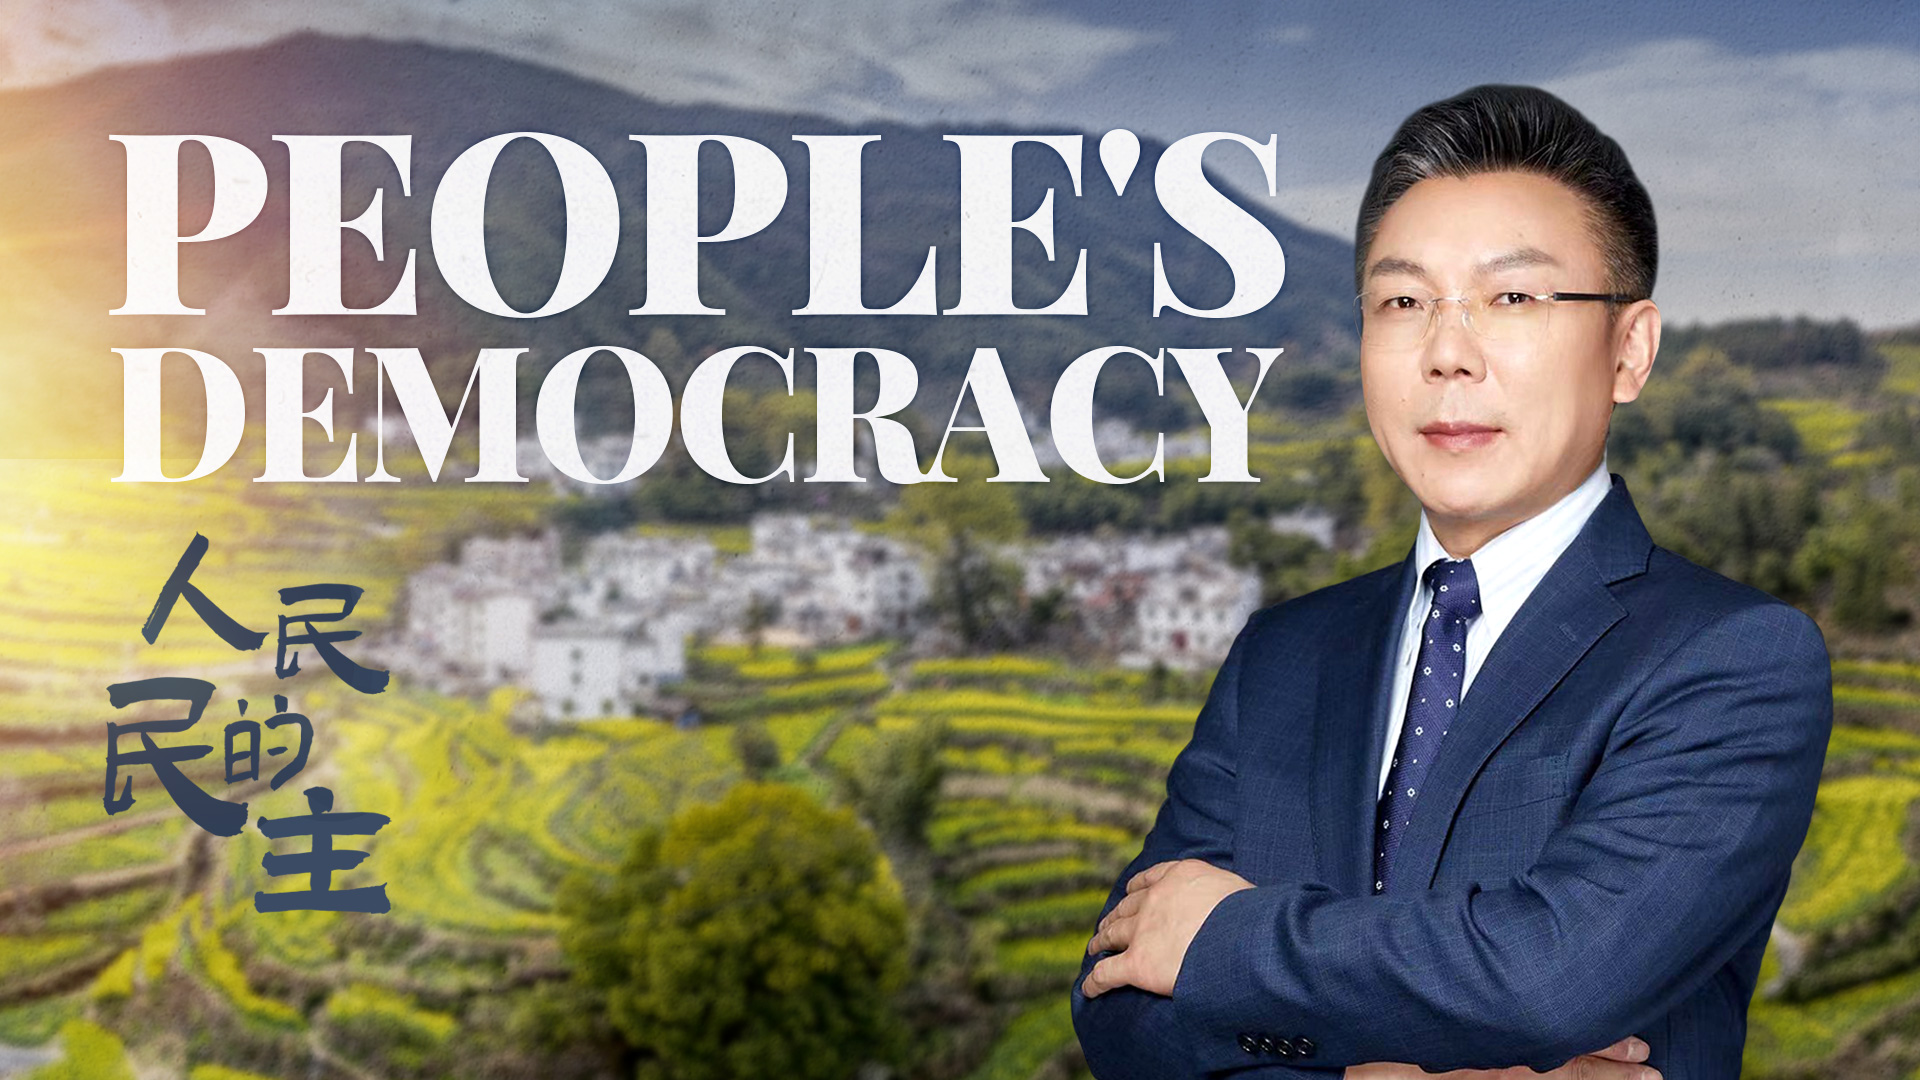 Watch: People's democracy – How does 'whole-process people's democracy' work in China?